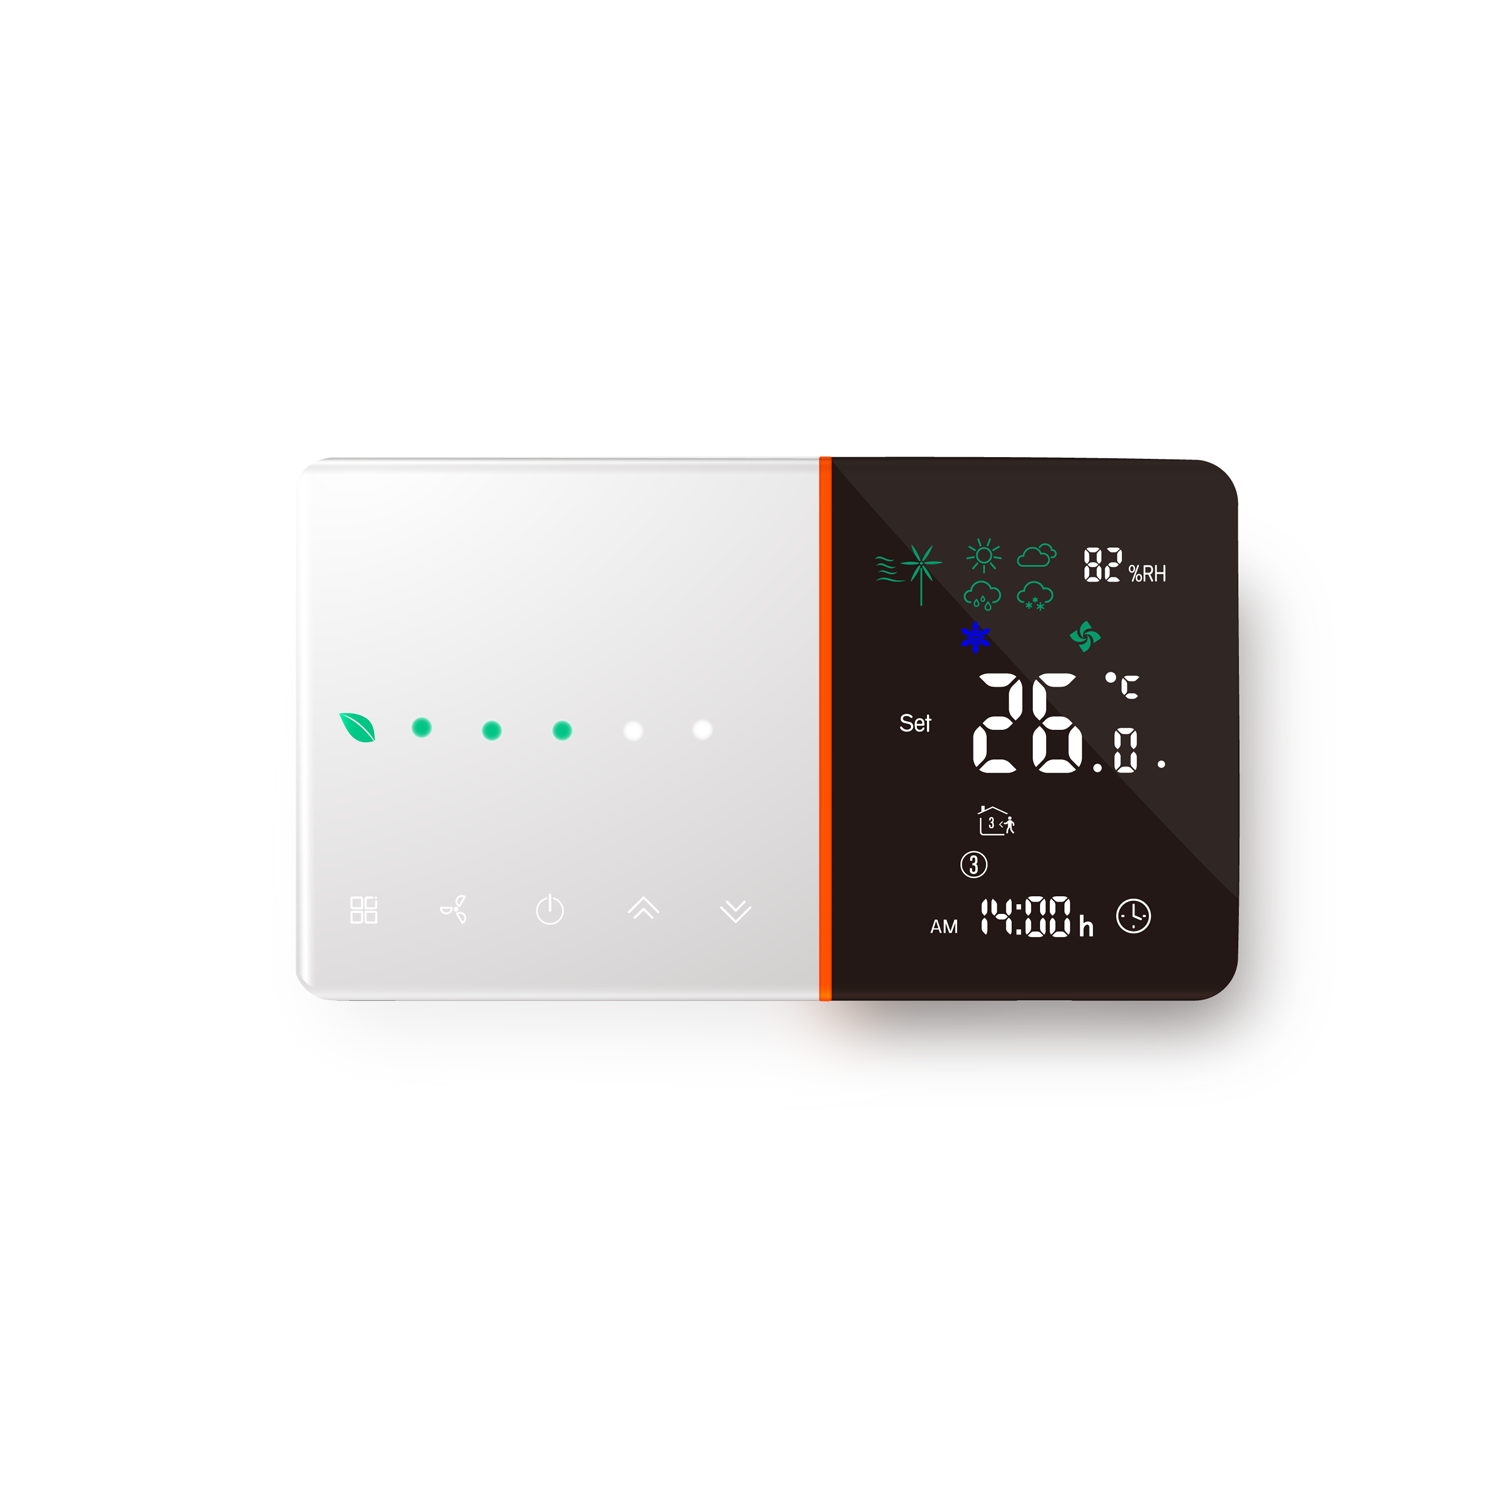 BAC-005 Series Room Smart Thermostat